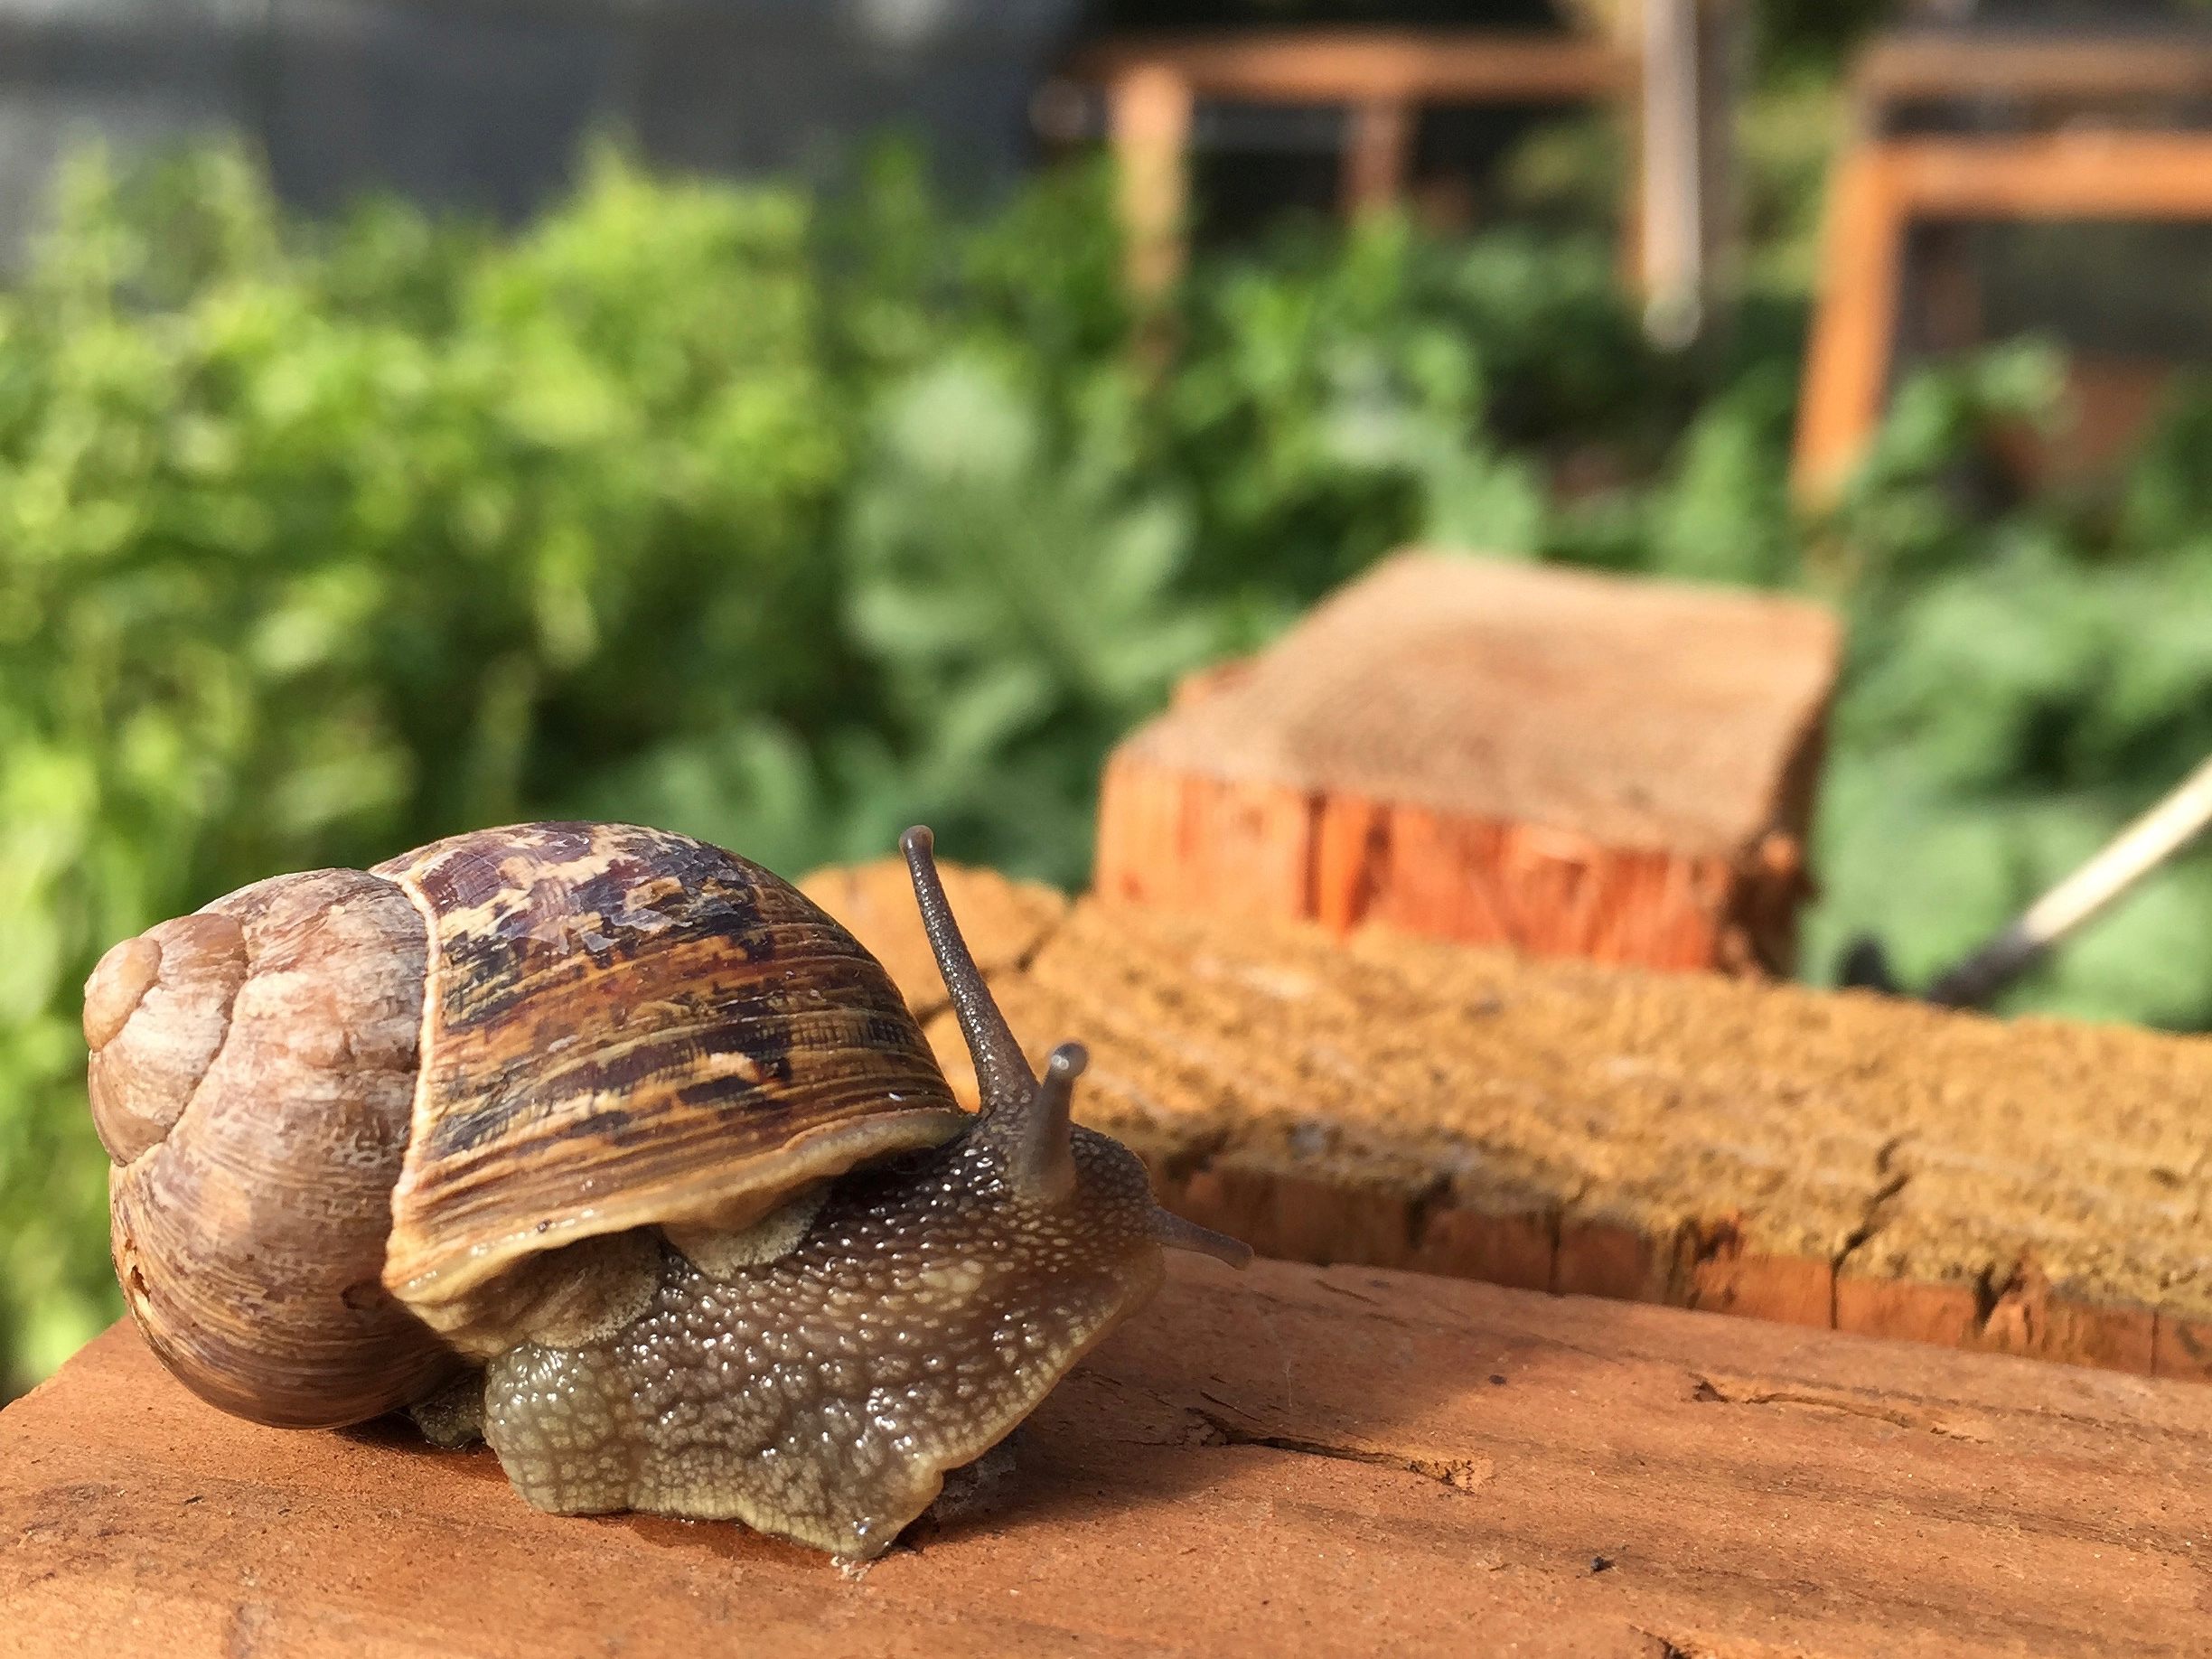 The Escargot Revolution: How Snails are Changing the Food Industry